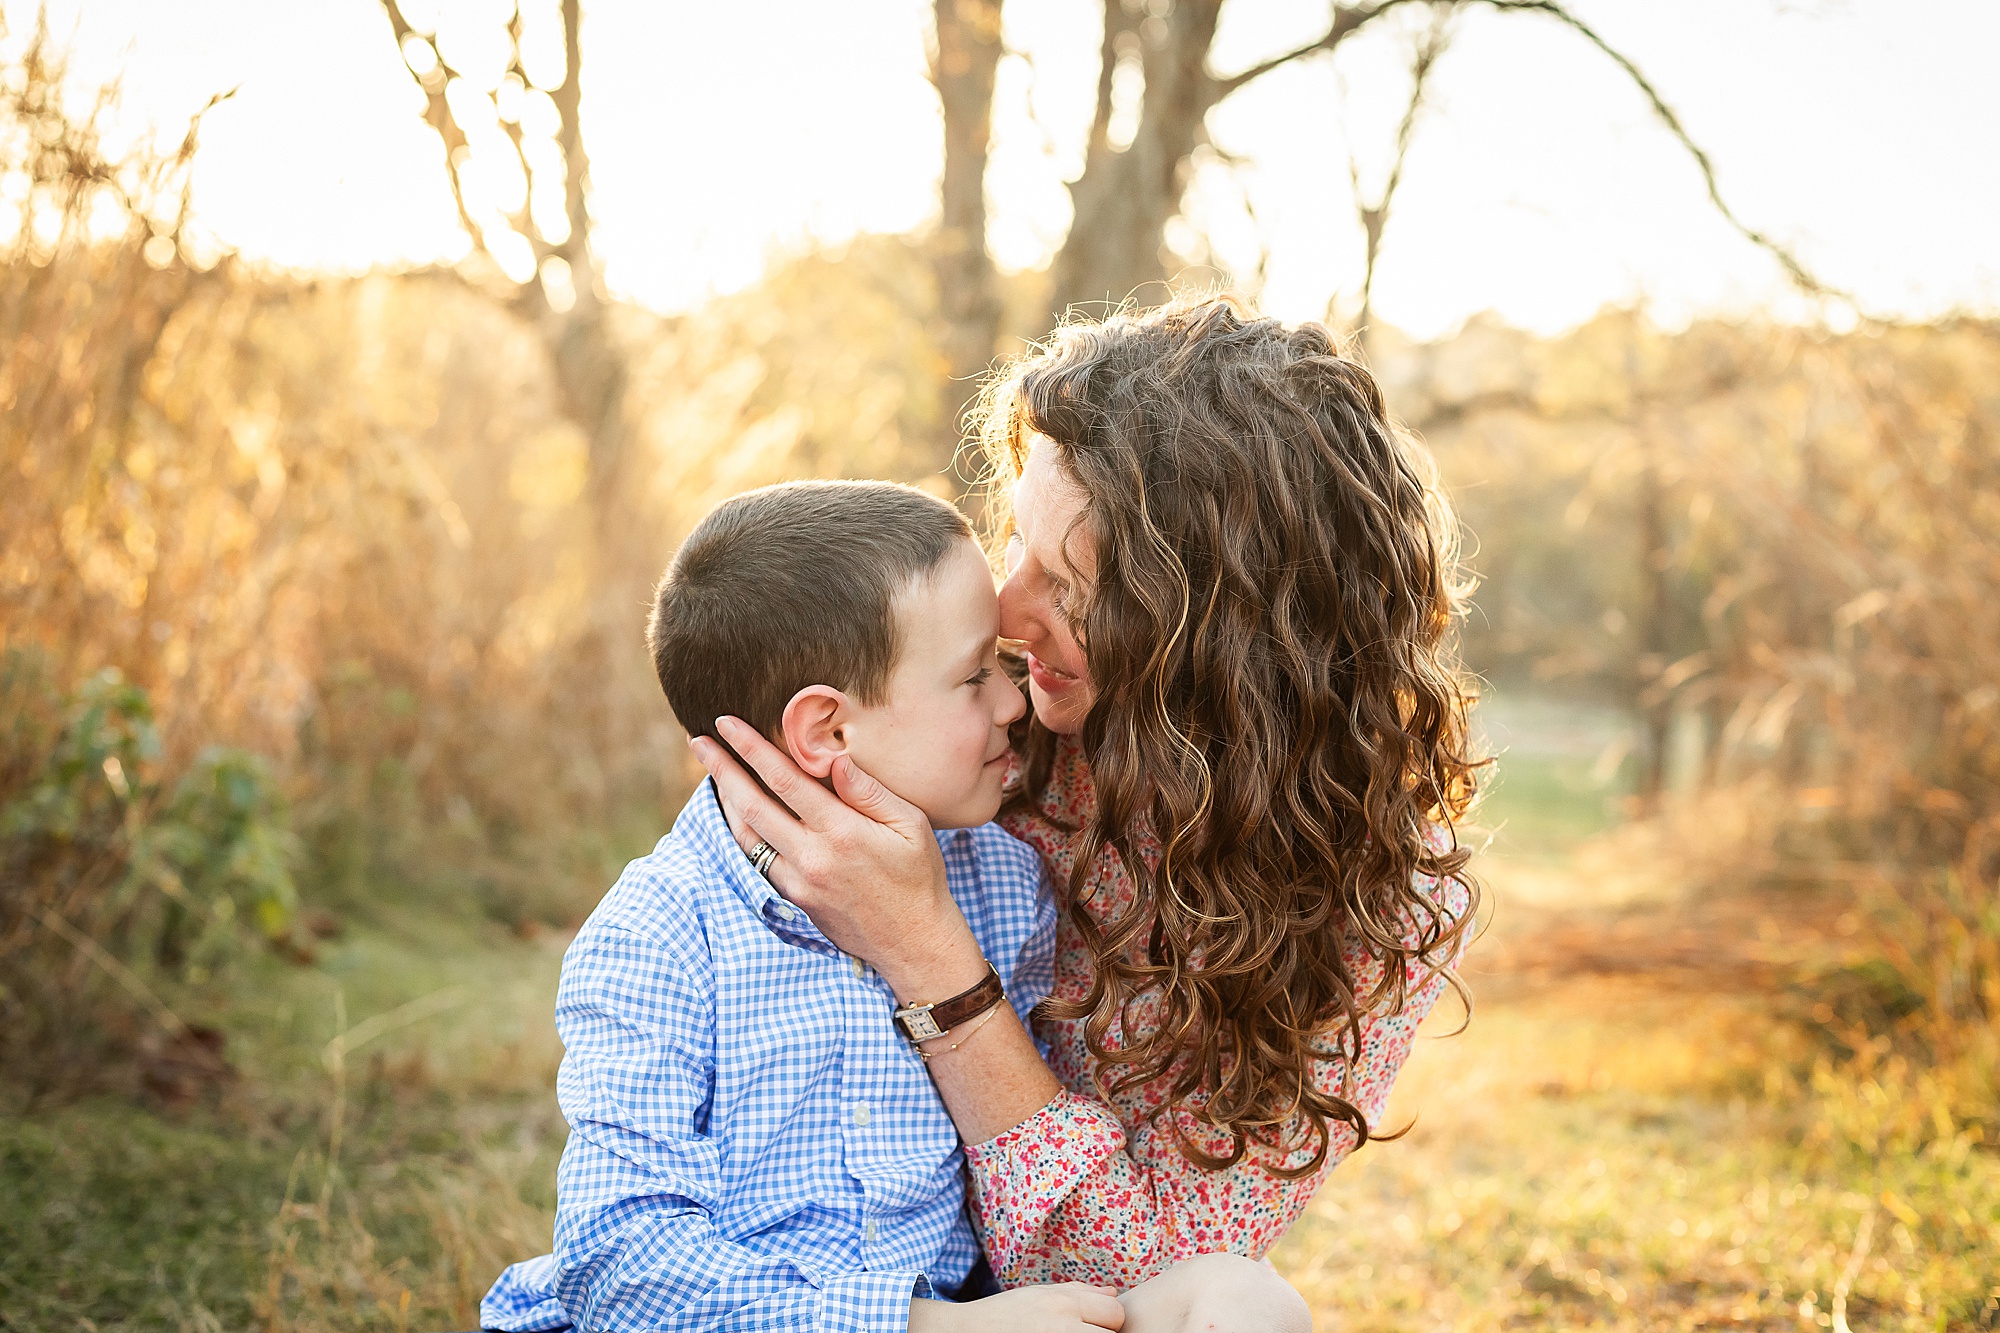 Mother and son sharing a special moment together in Queeny Park, St. Louis, MO | KGriggs Photography